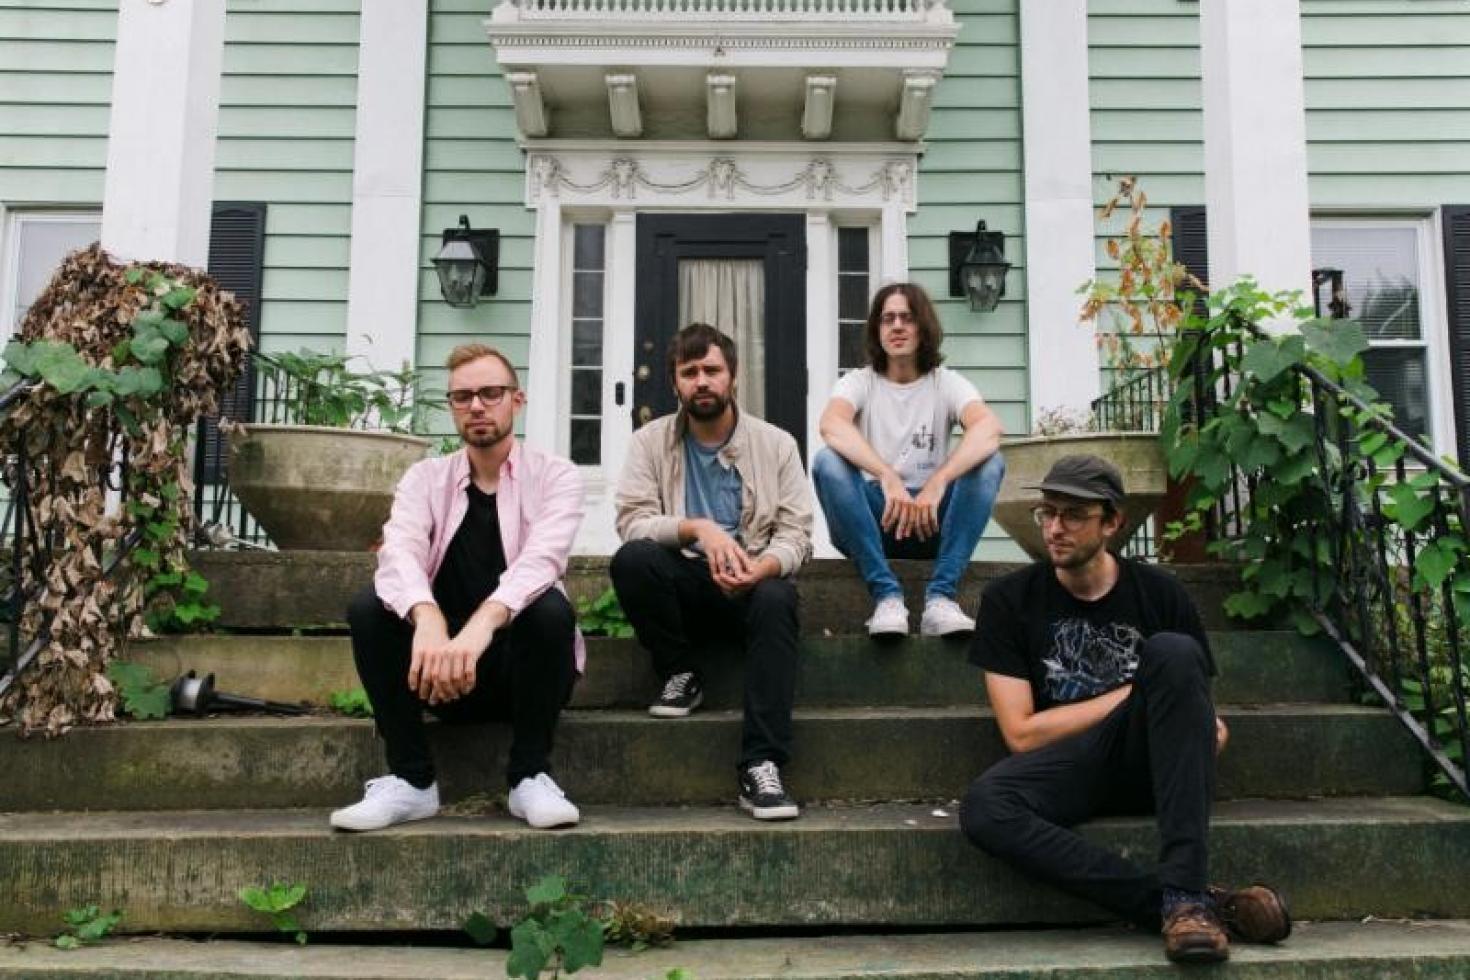 Cloud Nothings shares new song 'So Right So Clean'